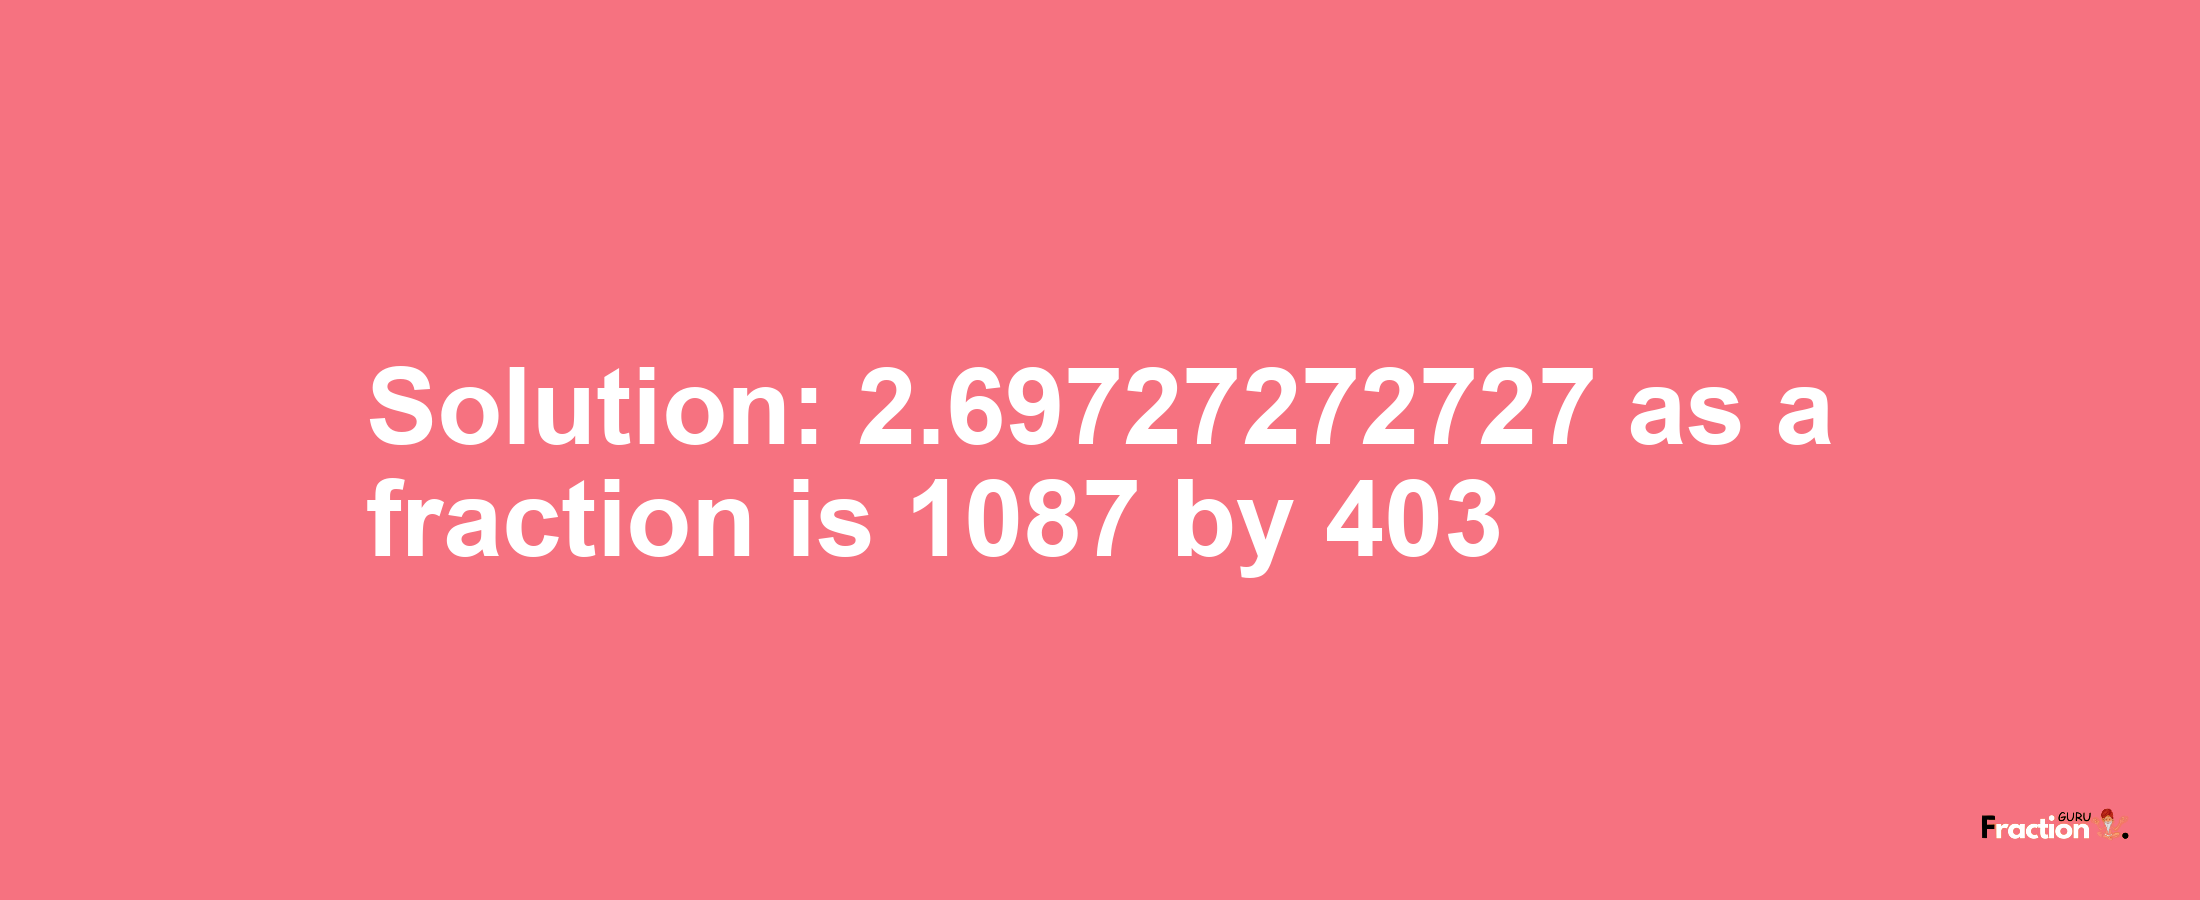 Solution:2.69727272727 as a fraction is 1087/403